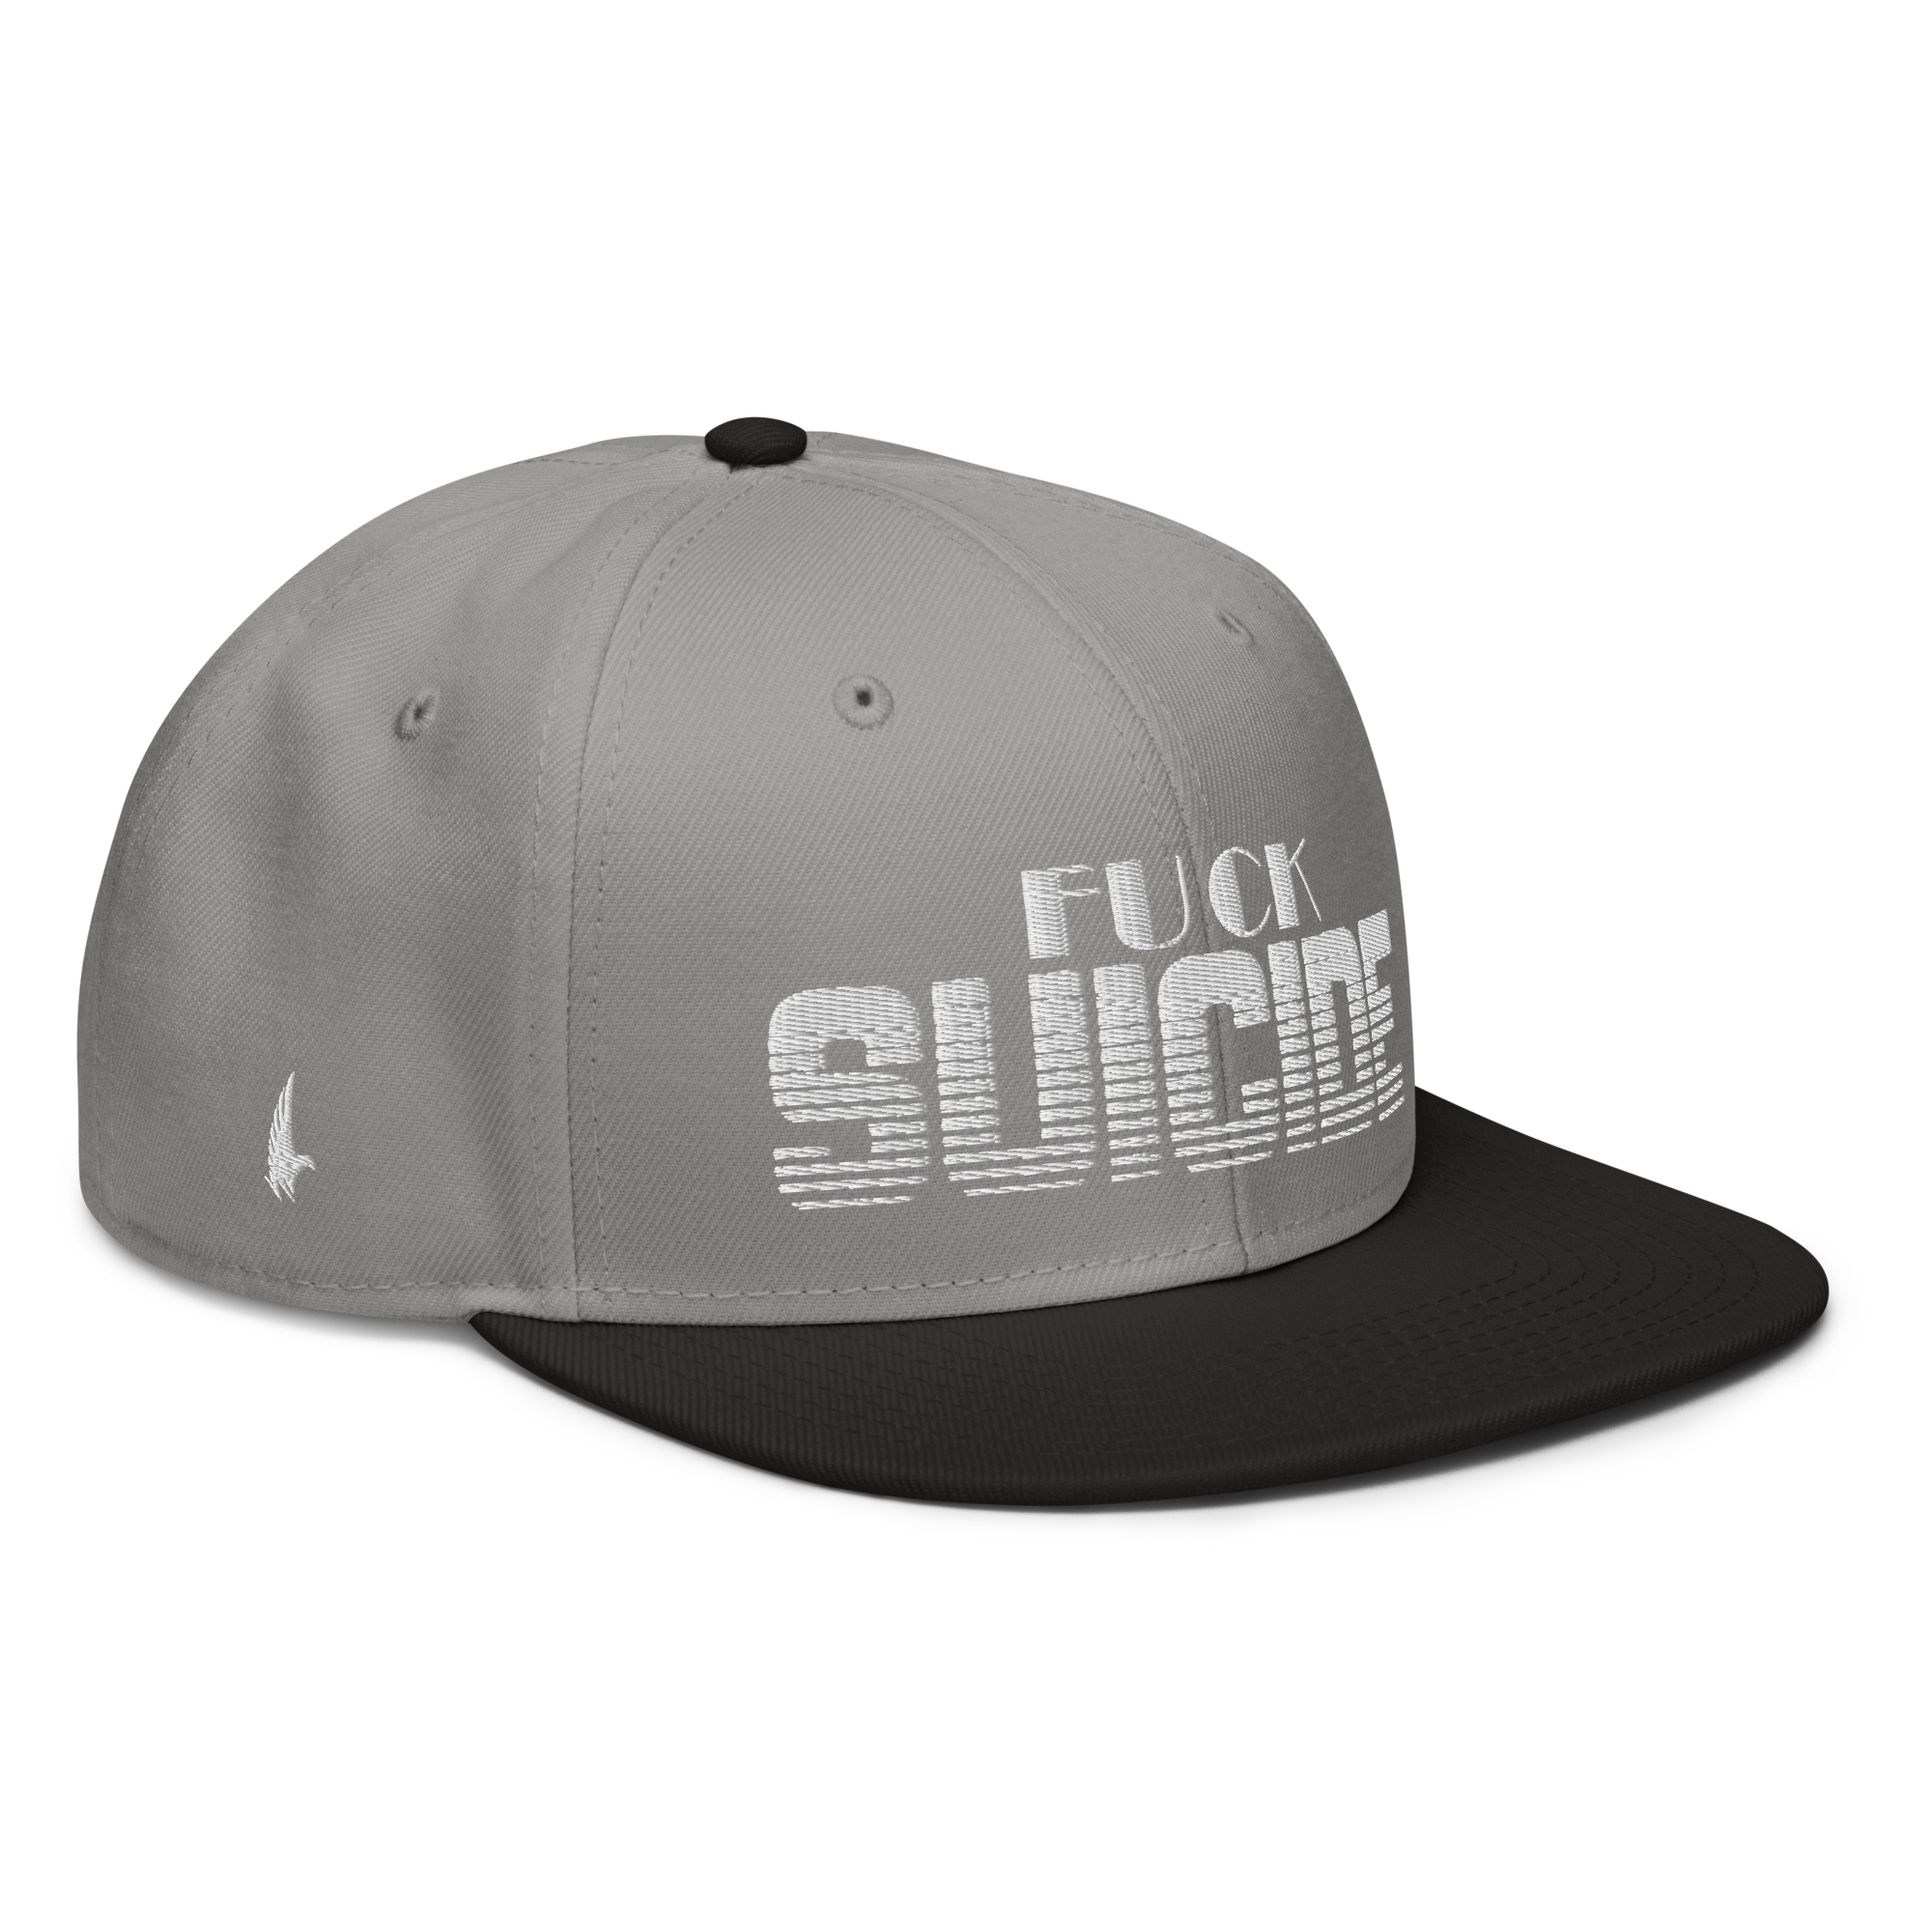 Fk Suicide Snapback Hat - Grey / White / Black OS - Loyalty Vibes